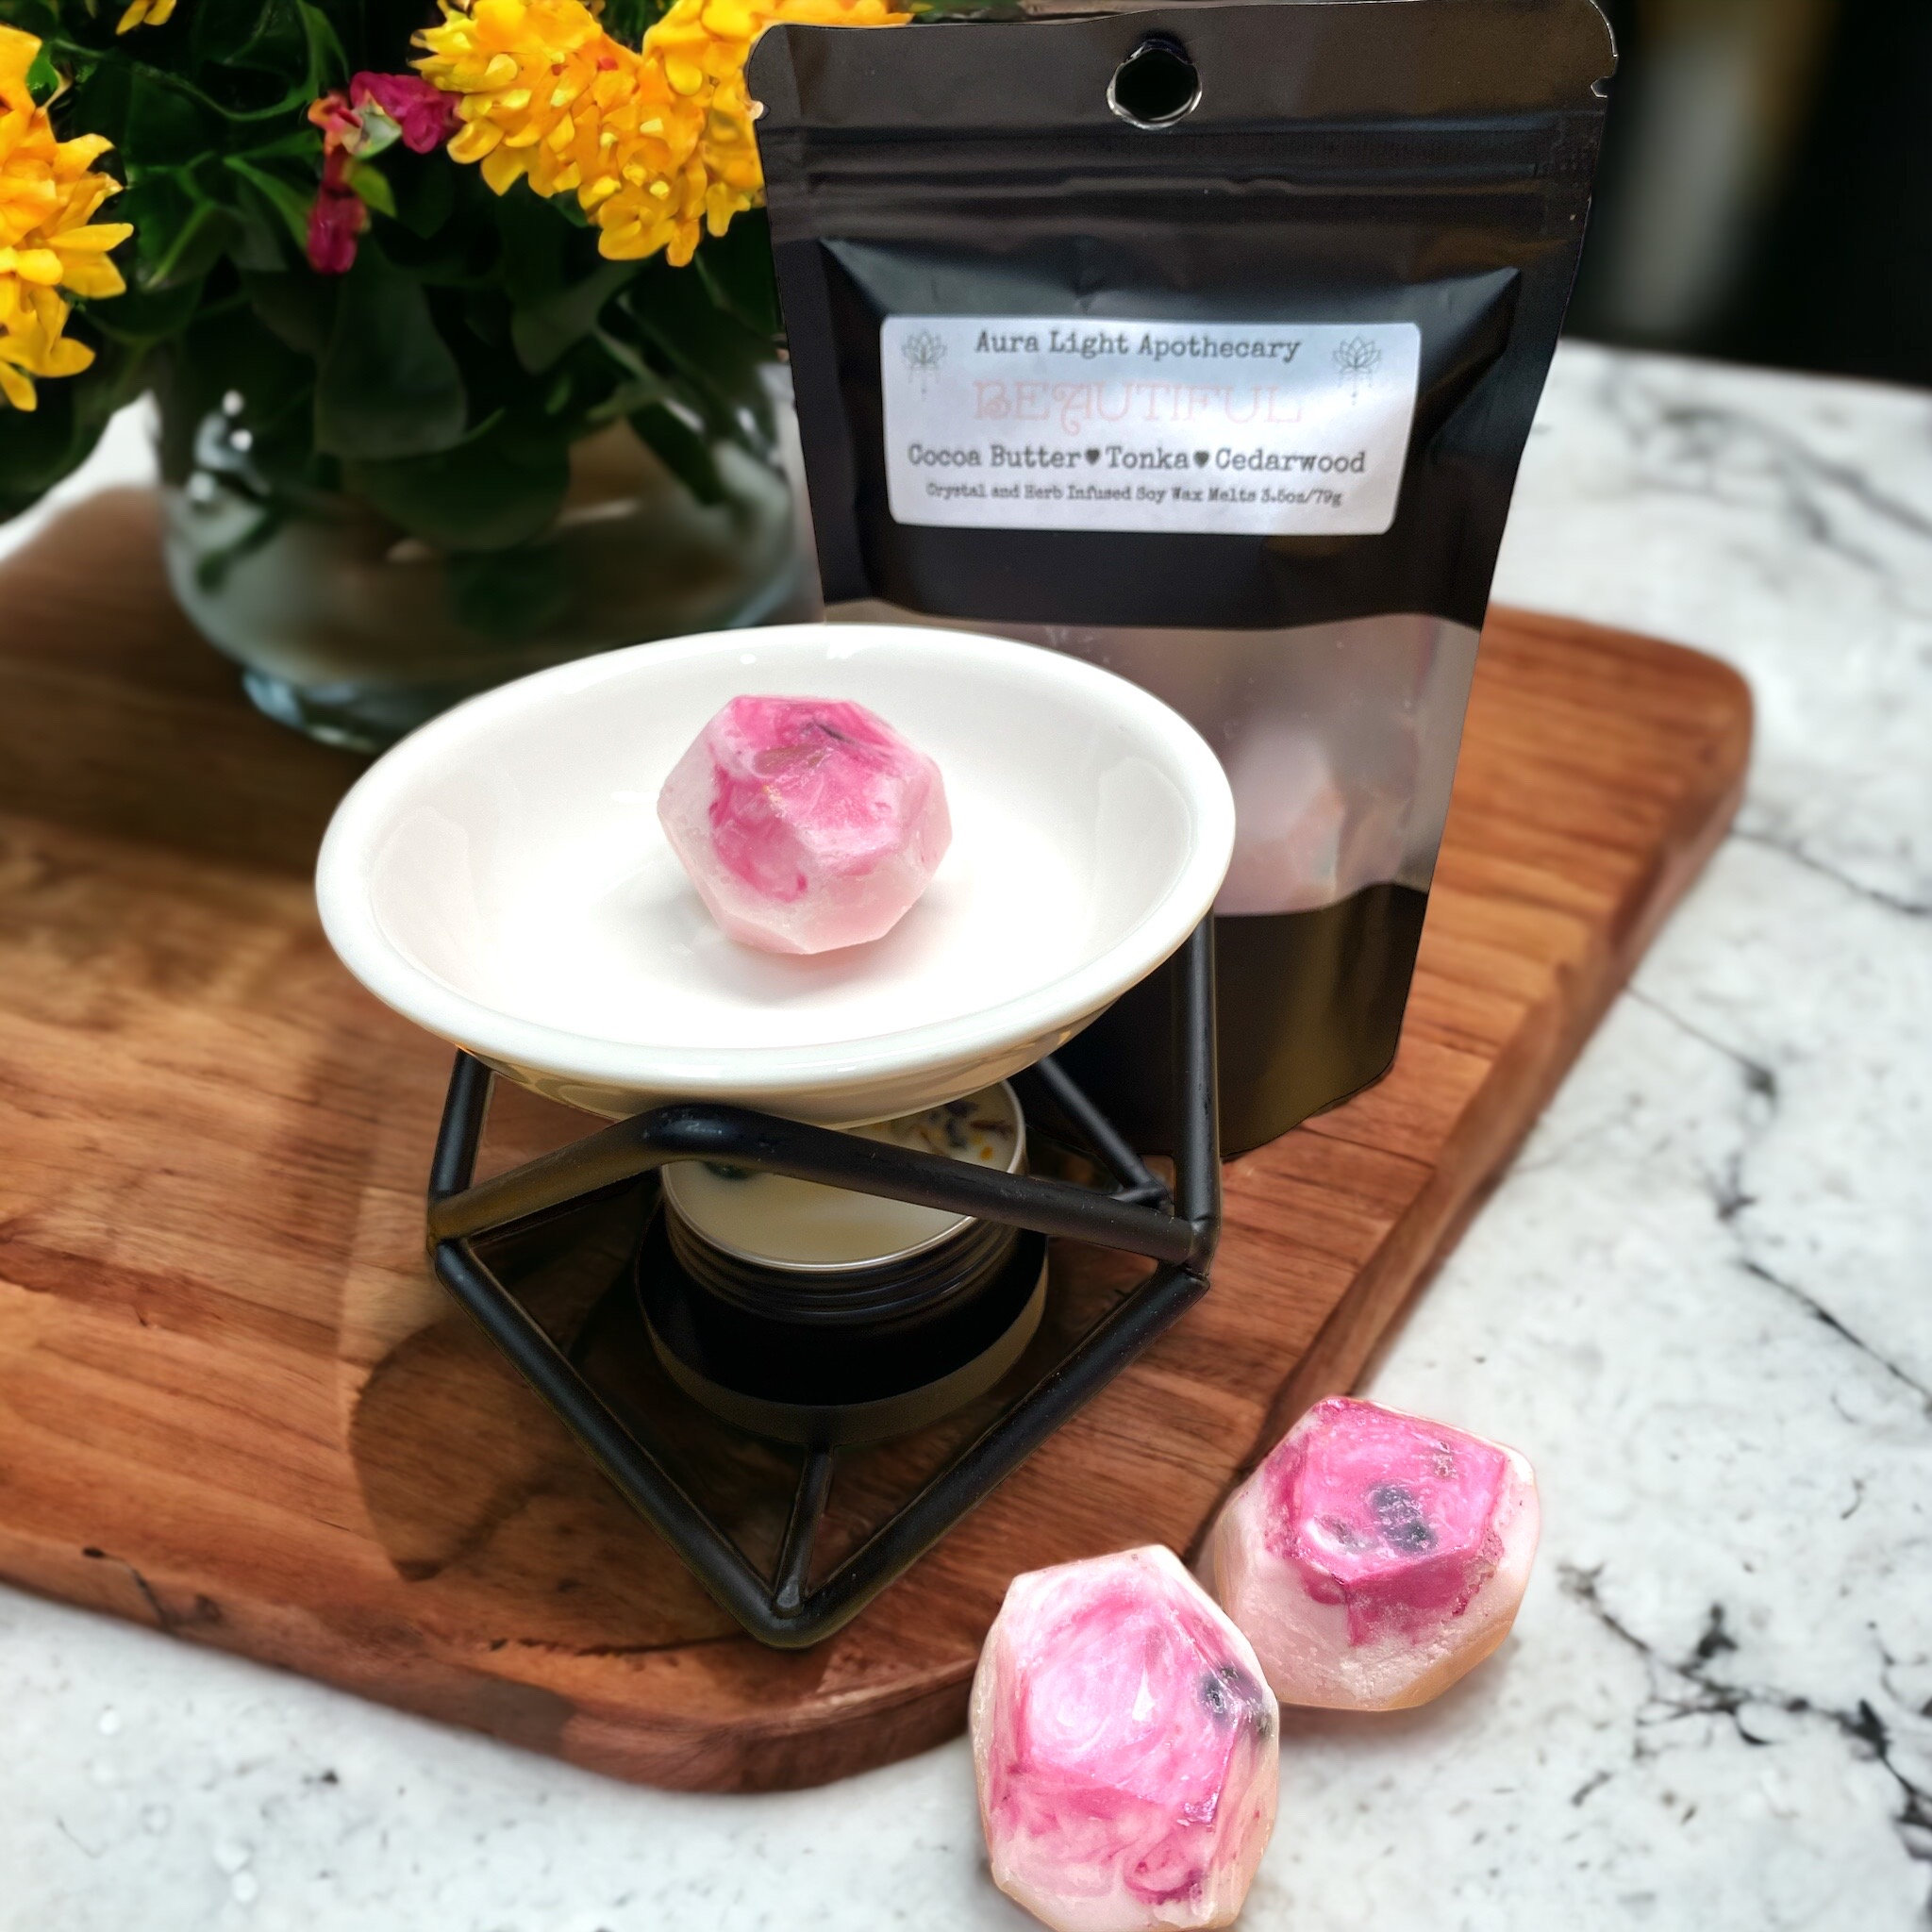 LA BELLEFÉE Wax Melts Wax Cubes, Natural Soy Wax Cubes Candle Melts,  Scented Wax Melts for Wax Warmer Mothers Day Gifts Decor, Floral of Rose